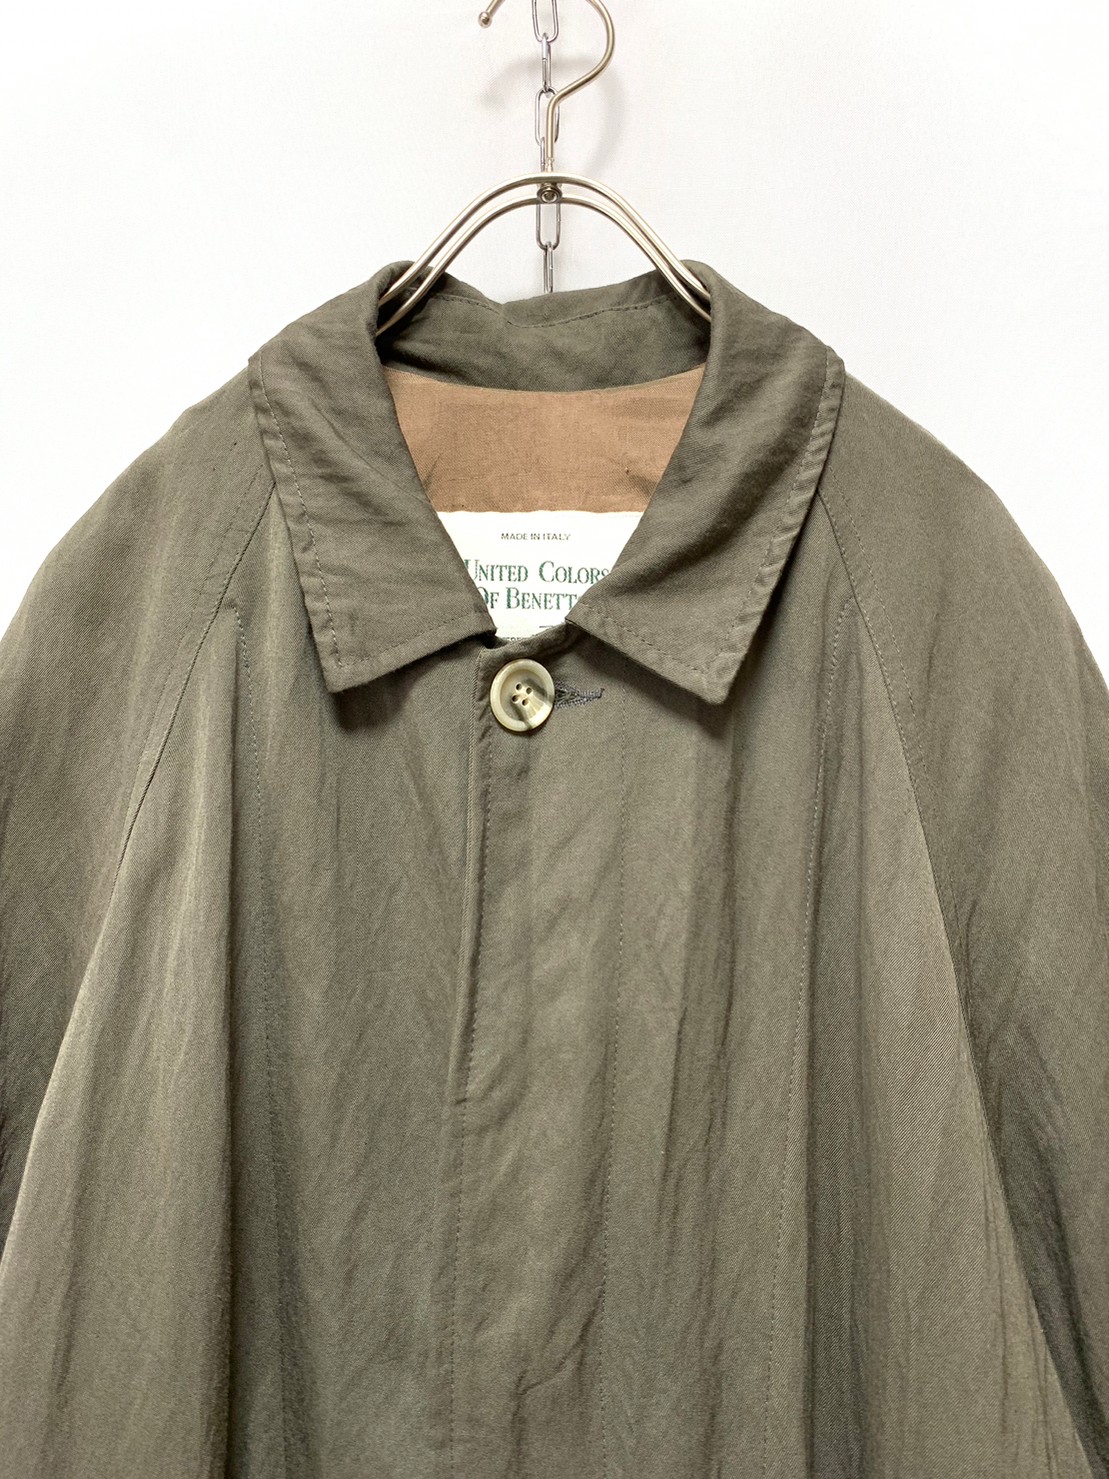 “BENETTON” Rayon Coat Made in ITALY